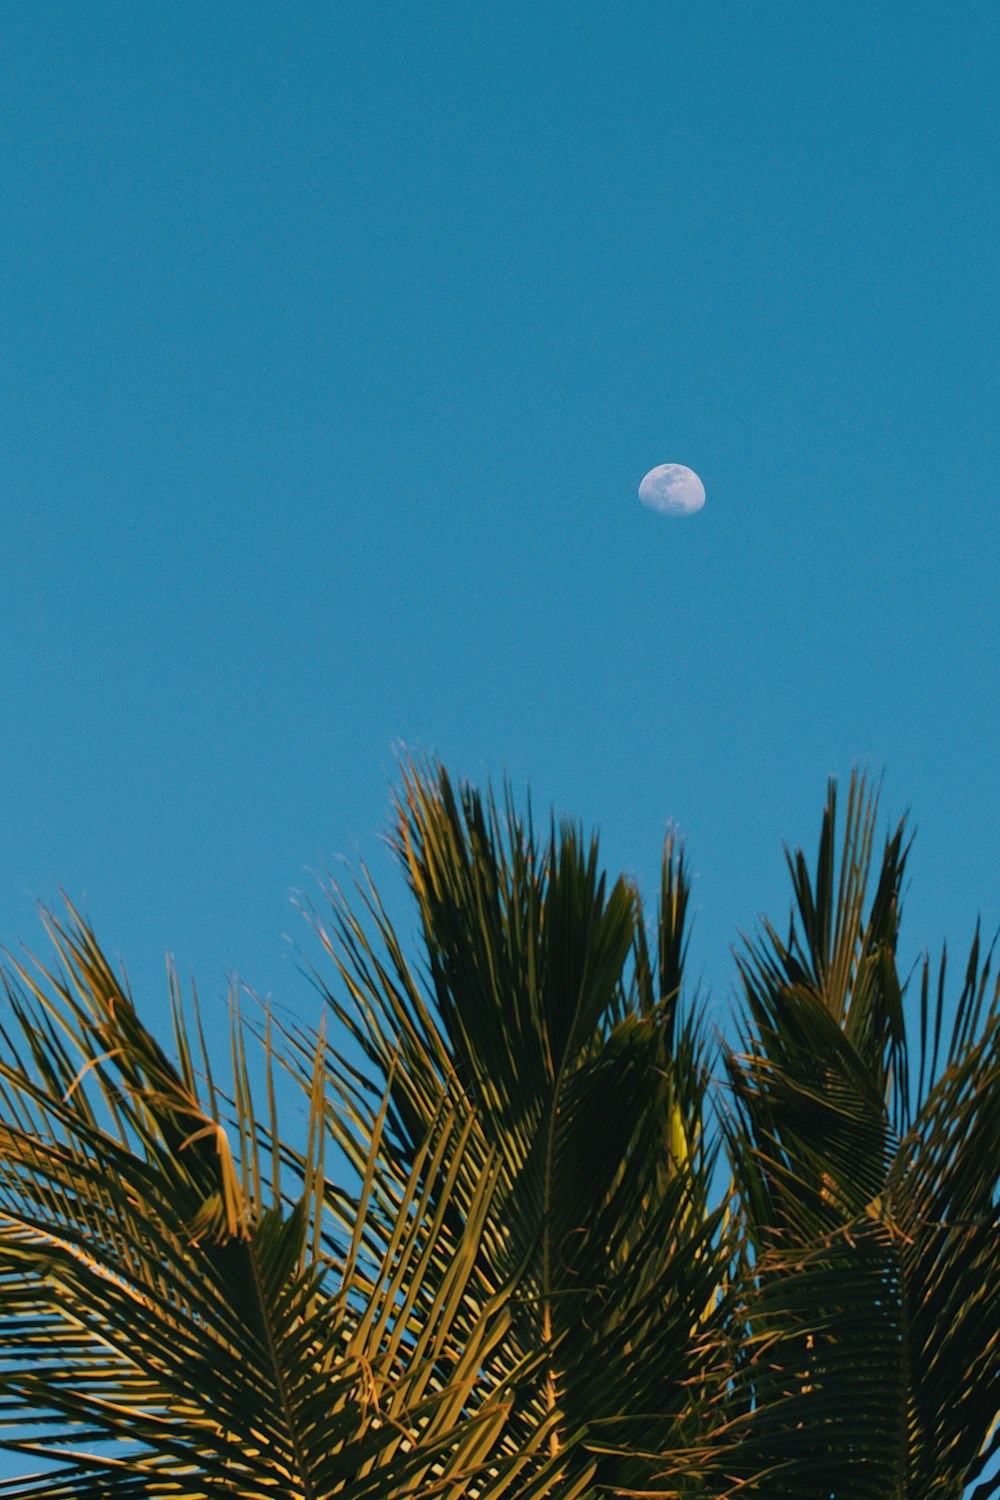 the moon is seen through the branches of a palm tree